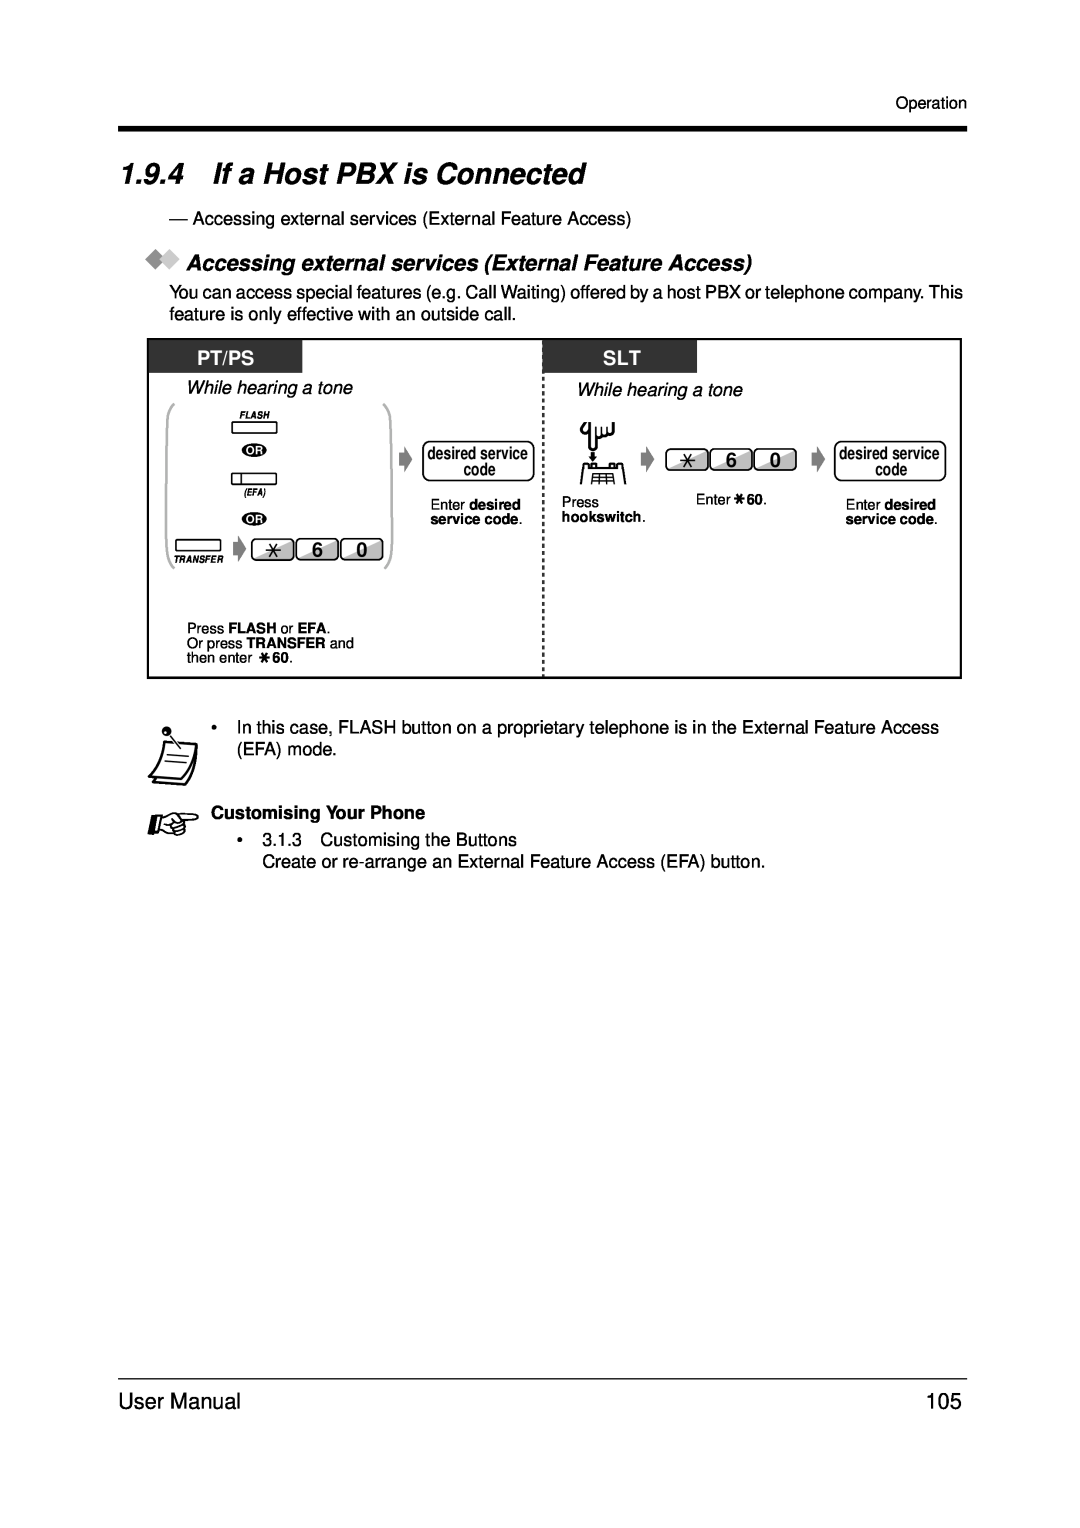 Panasonic KX-TDA200 user manual 1.9.4If a Host PBX is Connected, Pt/Ps, While hearing a tone, Customising Your Phone 